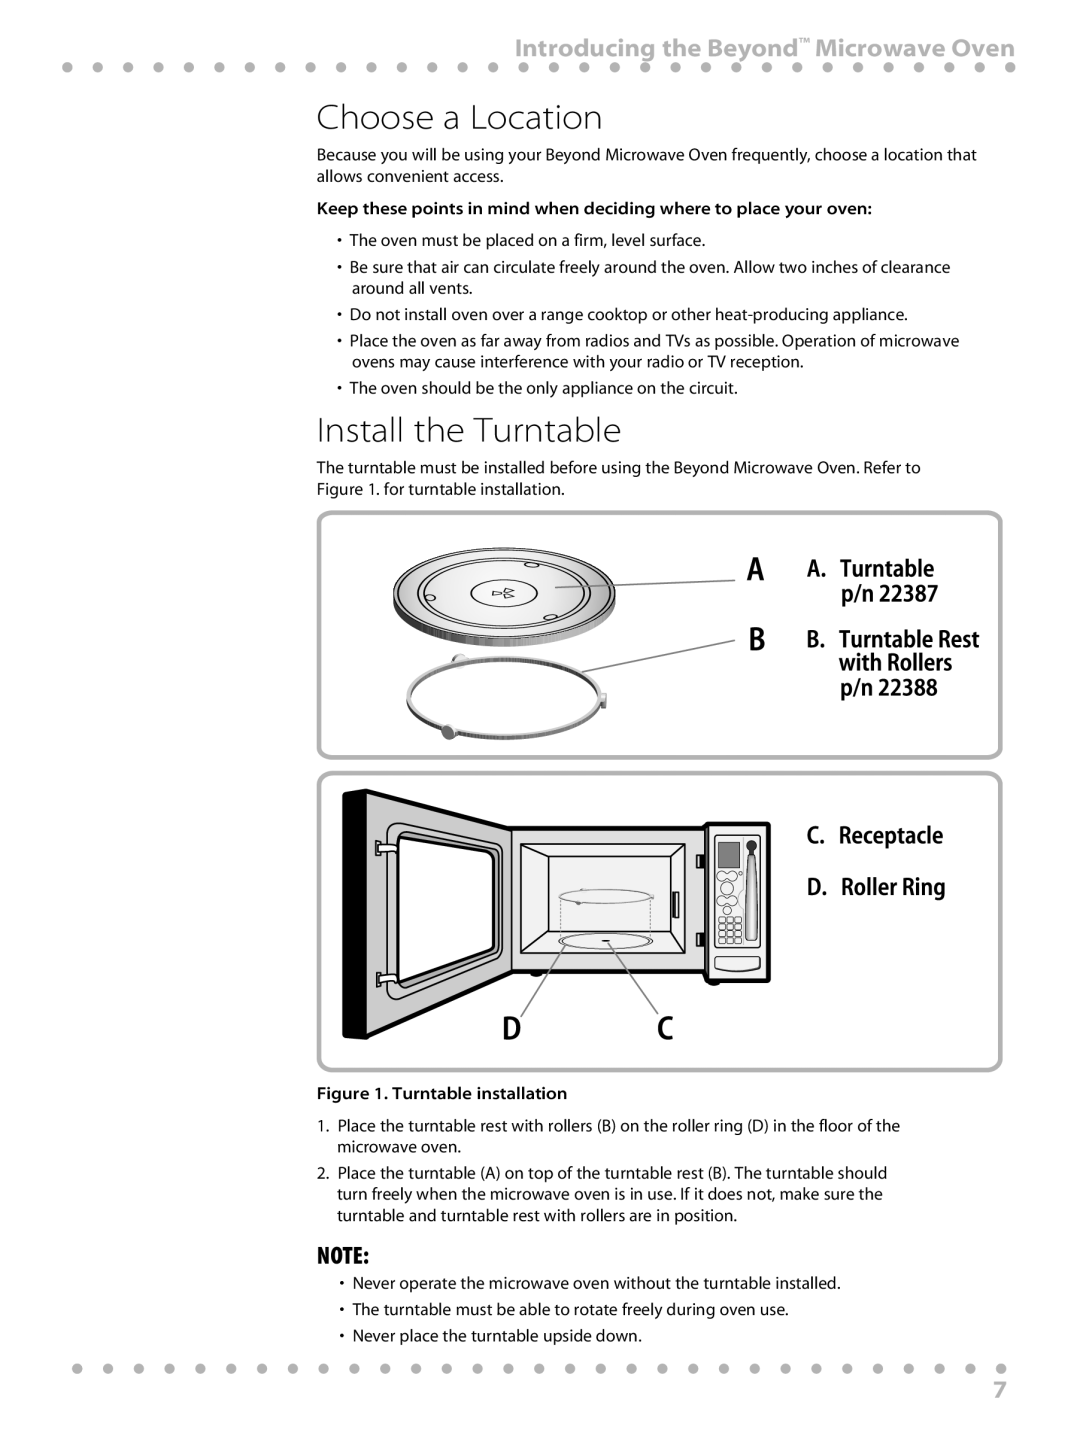 Toastmaster WBYMW1 manual Choose a Location, Install the Turntable, Introducing the Beyond Microwave Oven 